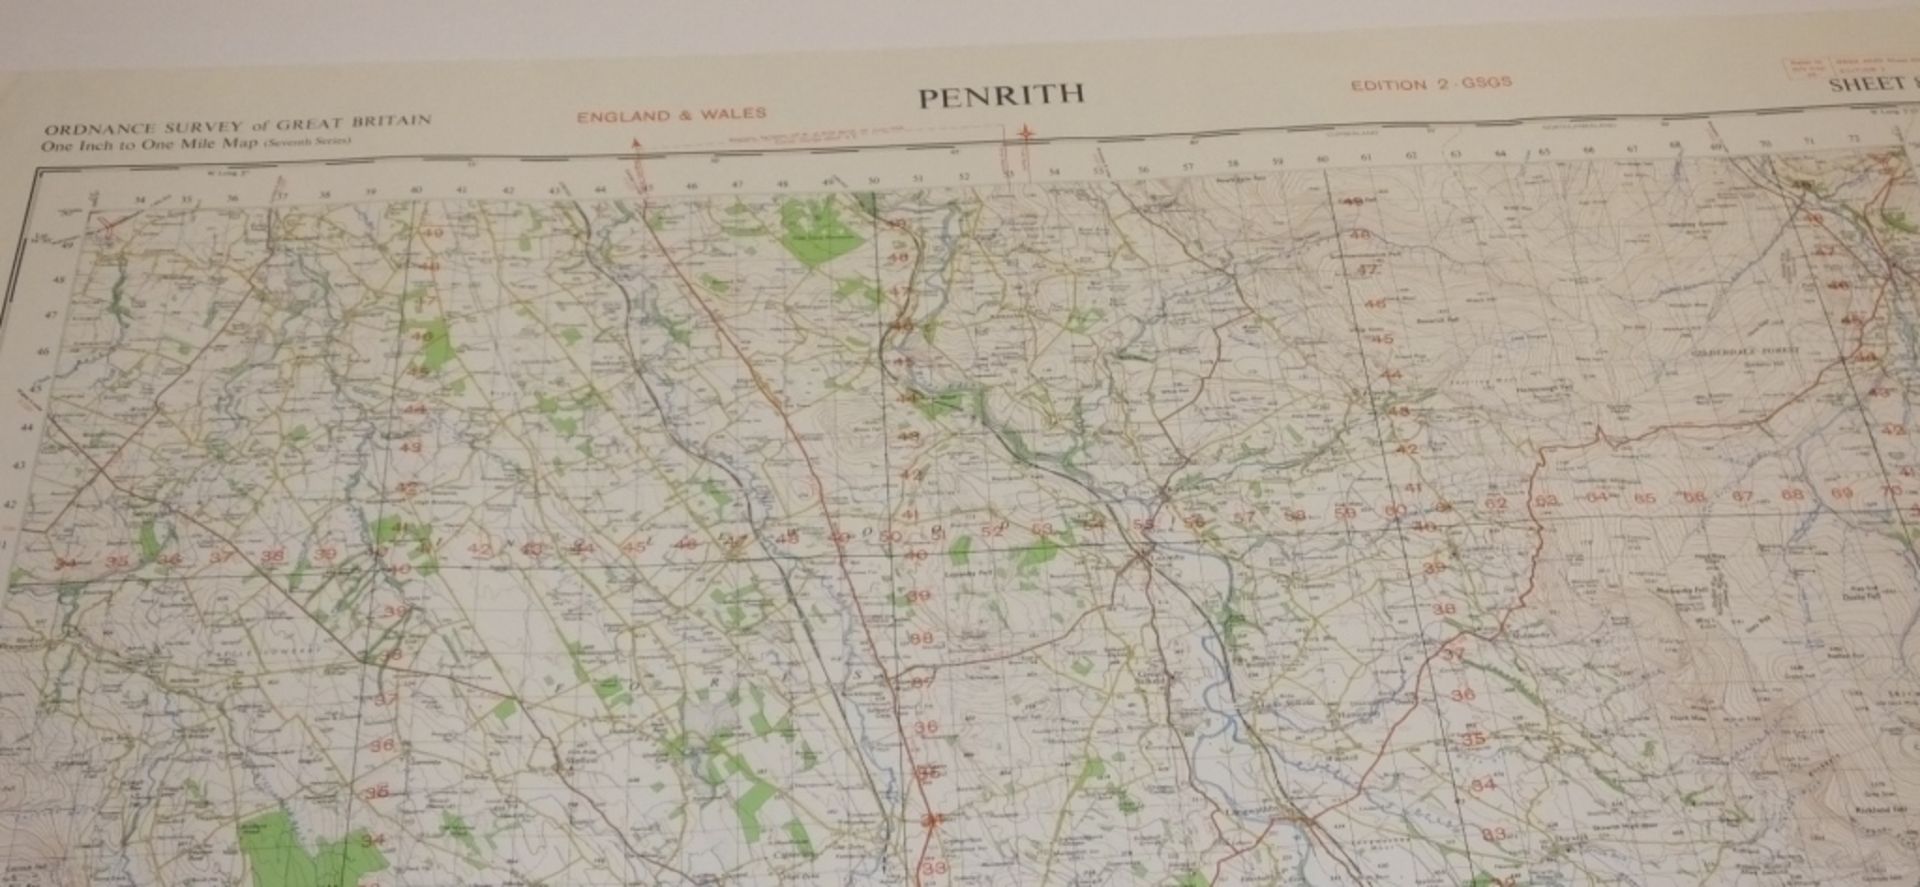 21x ENGLAND & WALES MAP PENRITH 1INCH 1MILE 1955 7TH SERIES EDITION2 4620GSGS SHEET 83 - Bild 2 aus 4